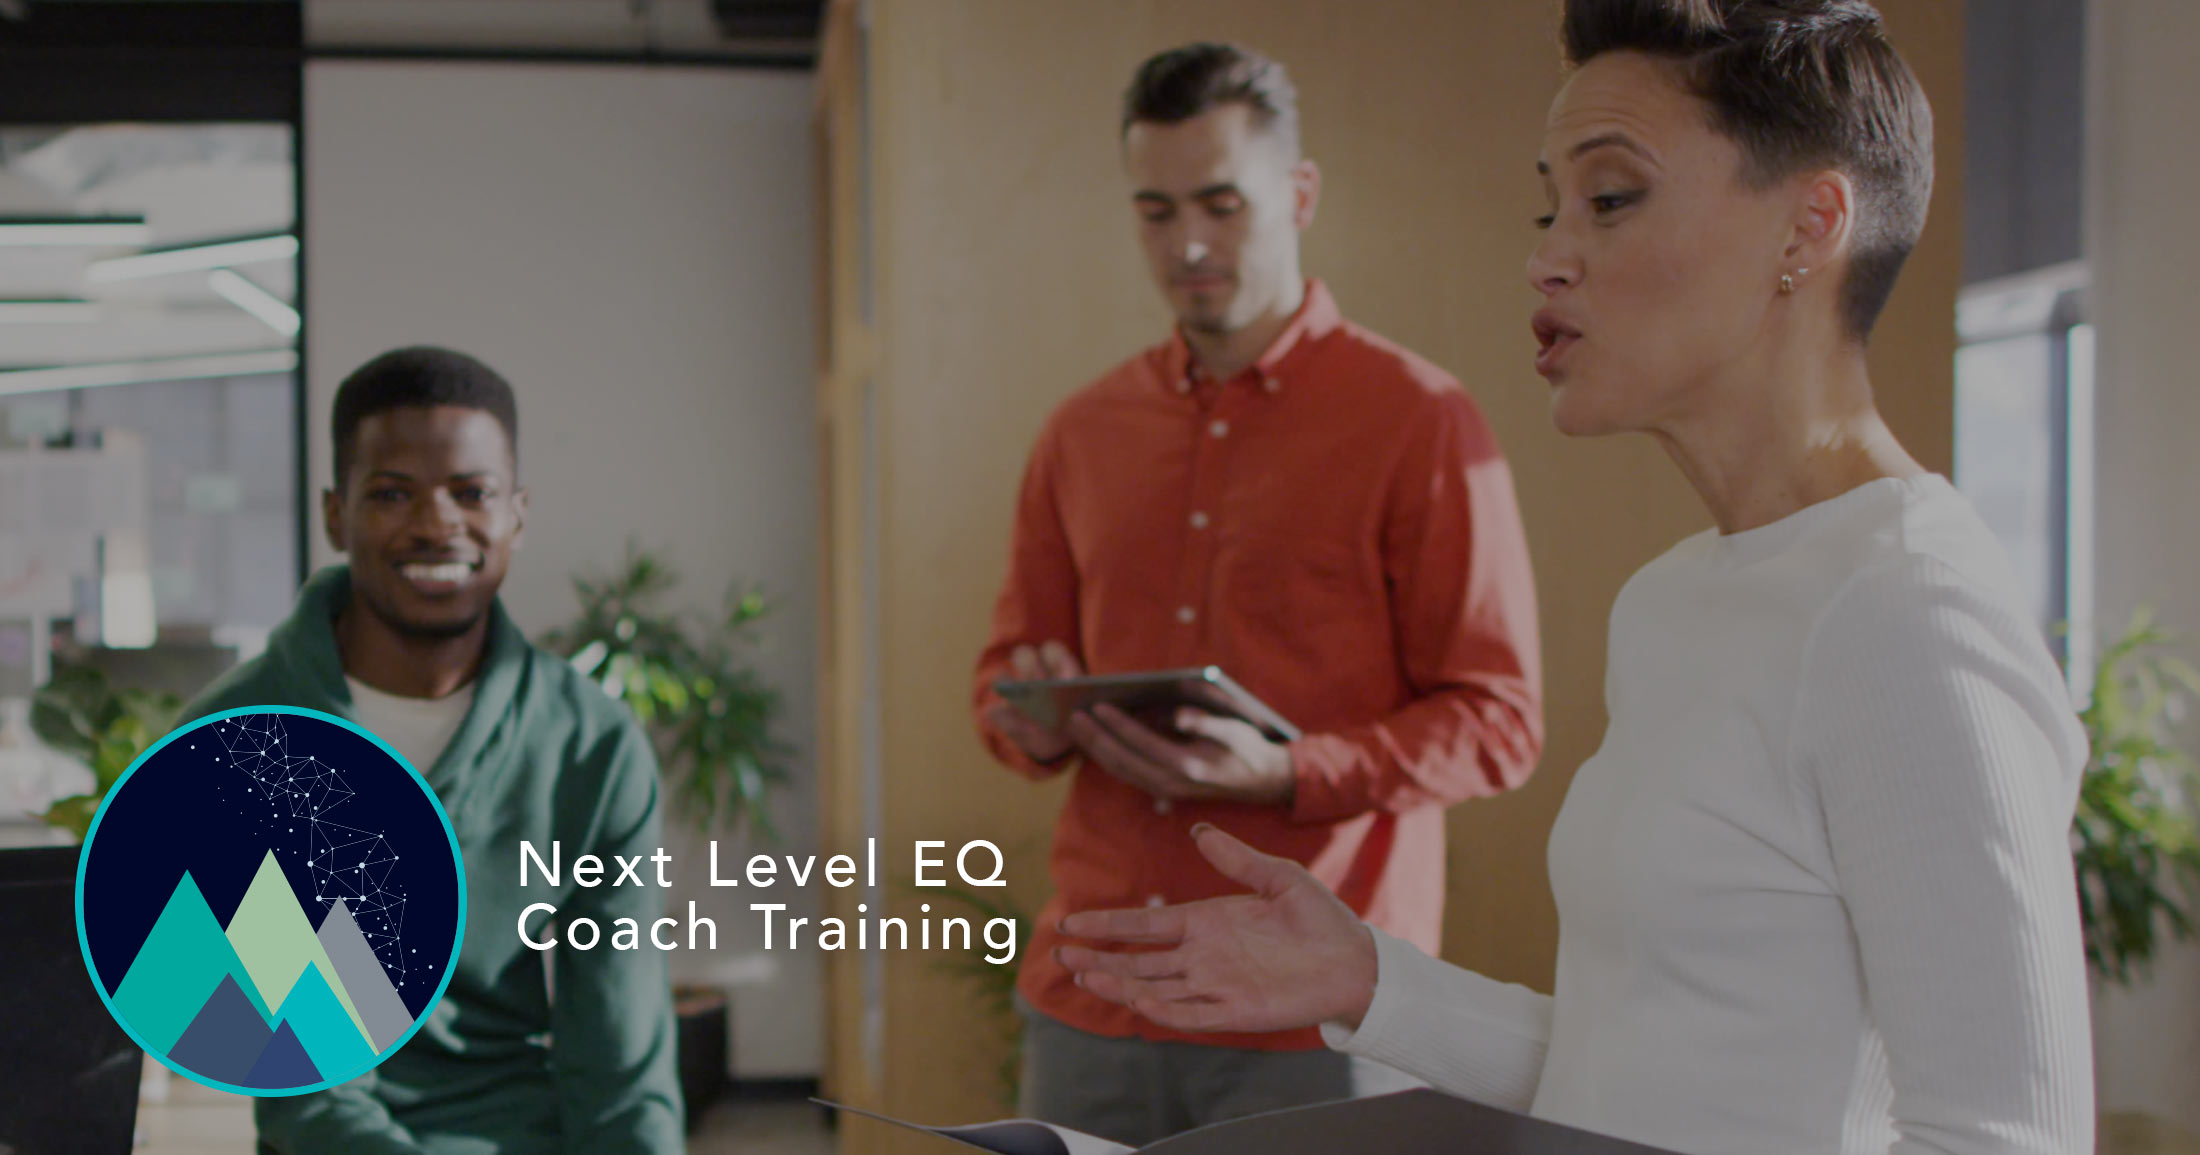 Join us for Next Level EQ Coach Training